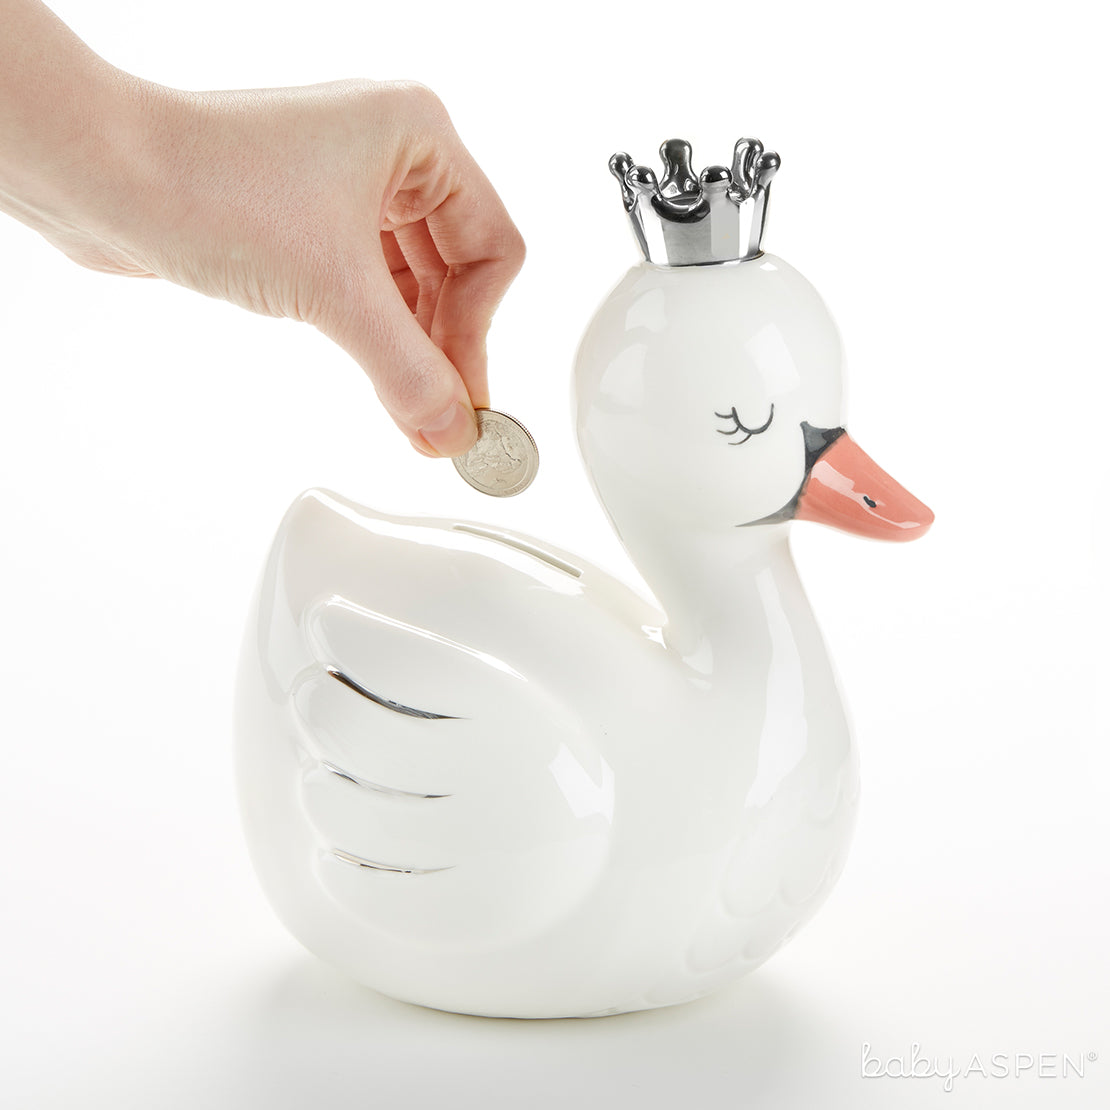 Swan Princess Porcelain Bank | Baby Banks You'll Want in Your Nursery | Baby Aspen